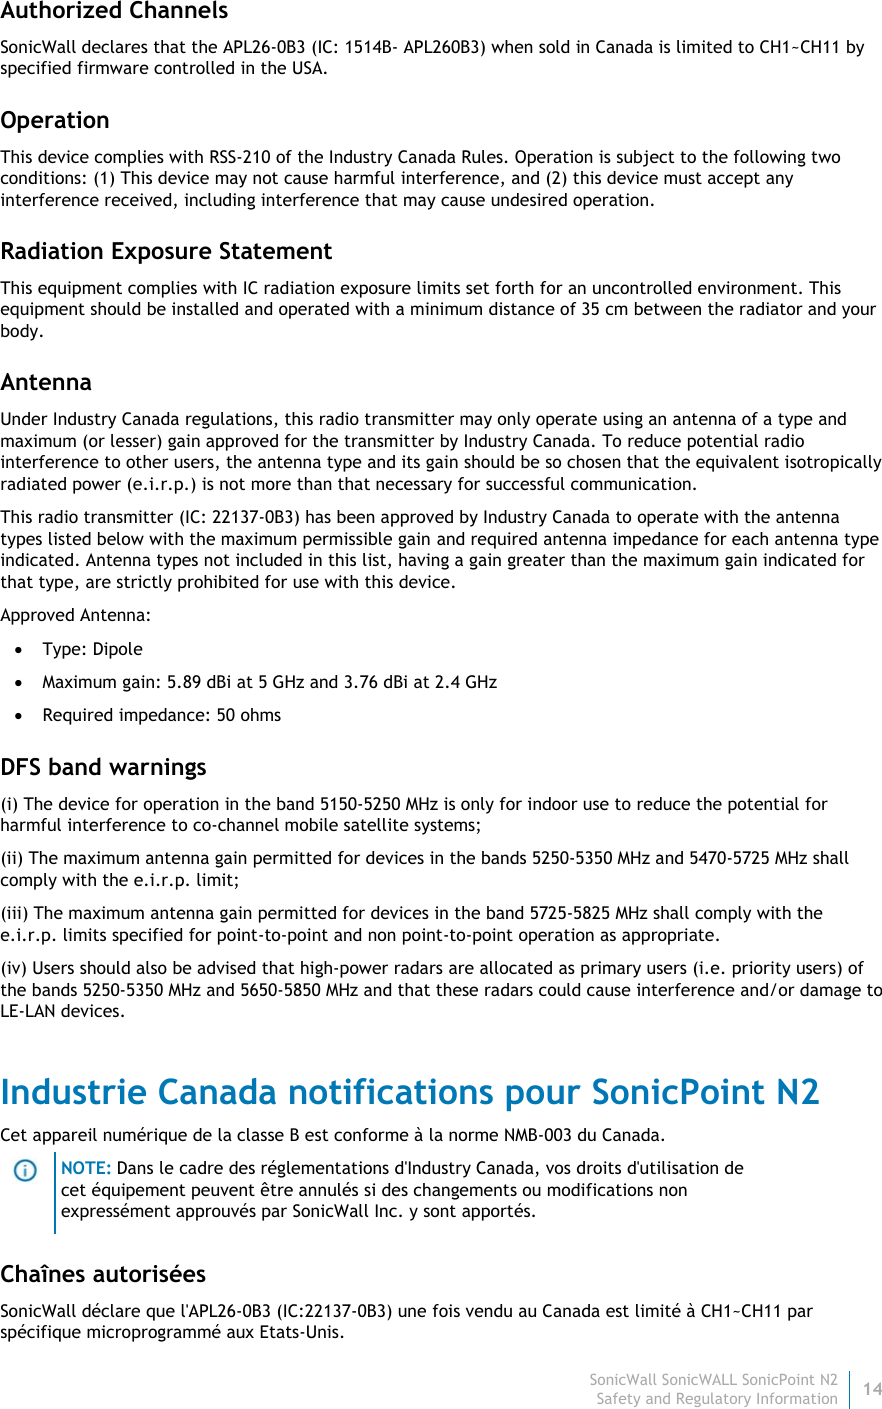 SonicWall SonicWALL SonicPoint N214 Safety and Regulatory Information Authorized Channels SonicWall declares that the APL26-0B3 (IC: 1514B- APL260B3) when sold in Canada is limited to CH1~CH11 by specified firmware controlled in the USA. Operation This device complies with RSS-210 of the Industry Canada Rules. Operation is subject to the following two conditions: (1) This device may not cause harmful interference, and (2) this device must accept any interference received, including interference that may cause undesired operation. Radiation Exposure Statement This equipment complies with IC radiation exposure limits set forth for an uncontrolled environment. This equipment should be installed and operated with a minimum distance of 35 cm between the radiator and your body. Antenna Under Industry Canada regulations, this radio transmitter may only operate using an antenna of a type and maximum (or lesser) gain approved for the transmitter by Industry Canada. To reduce potential radio interference to other users, the antenna type and its gain should be so chosen that the equivalent isotropically radiated power (e.i.r.p.) is not more than that necessary for successful communication. This radio transmitter (IC: 22137-0B3) has been approved by Industry Canada to operate with the antenna types listed below with the maximum permissible gain and required antenna impedance for each antenna type indicated. Antenna types not included in this list, having a gain greater than the maximum gain indicated for that type, are strictly prohibited for use with this device. Approved Antenna:  Type: Dipole  Maximum gain: 5.89 dBi at 5 GHz and 3.76 dBi at 2.4 GHz  Required impedance: 50 ohms DFS band warnings (i) The device for operation in the band 5150-5250 MHz is only for indoor use to reduce the potential for harmful interference to co-channel mobile satellite systems; (ii) The maximum antenna gain permitted for devices in the bands 5250-5350 MHz and 5470-5725 MHz shall comply with the e.i.r.p. limit; (iii) The maximum antenna gain permitted for devices in the band 5725-5825 MHz shall comply with the e.i.r.p. limits specified for point-to-point and non point-to-point operation as appropriate. (iv) Users should also be advised that high-power radars are allocated as primary users (i.e. priority users) of the bands 5250-5350 MHz and 5650-5850 MHz and that these radars could cause interference and/or damage to LE-LAN devices. Industrie Canada notifications pour SonicPoint N2 Cet appareil numérique de la classe B est conforme à la norme NMB-003 du Canada.  NOTE: Dans le cadre des réglementations d&apos;Industry Canada, vos droits d&apos;utilisation de cet équipement peuvent être annulés si des changements ou modifications non expressément approuvés par SonicWall Inc. y sont apportés. Chaînes autorisées SonicWall déclare que l&apos;APL26-0B3 (IC:22137-0B3) une fois vendu au Canada est limité à CH1~CH11 par spécifique microprogrammé aux Etats-Unis. 